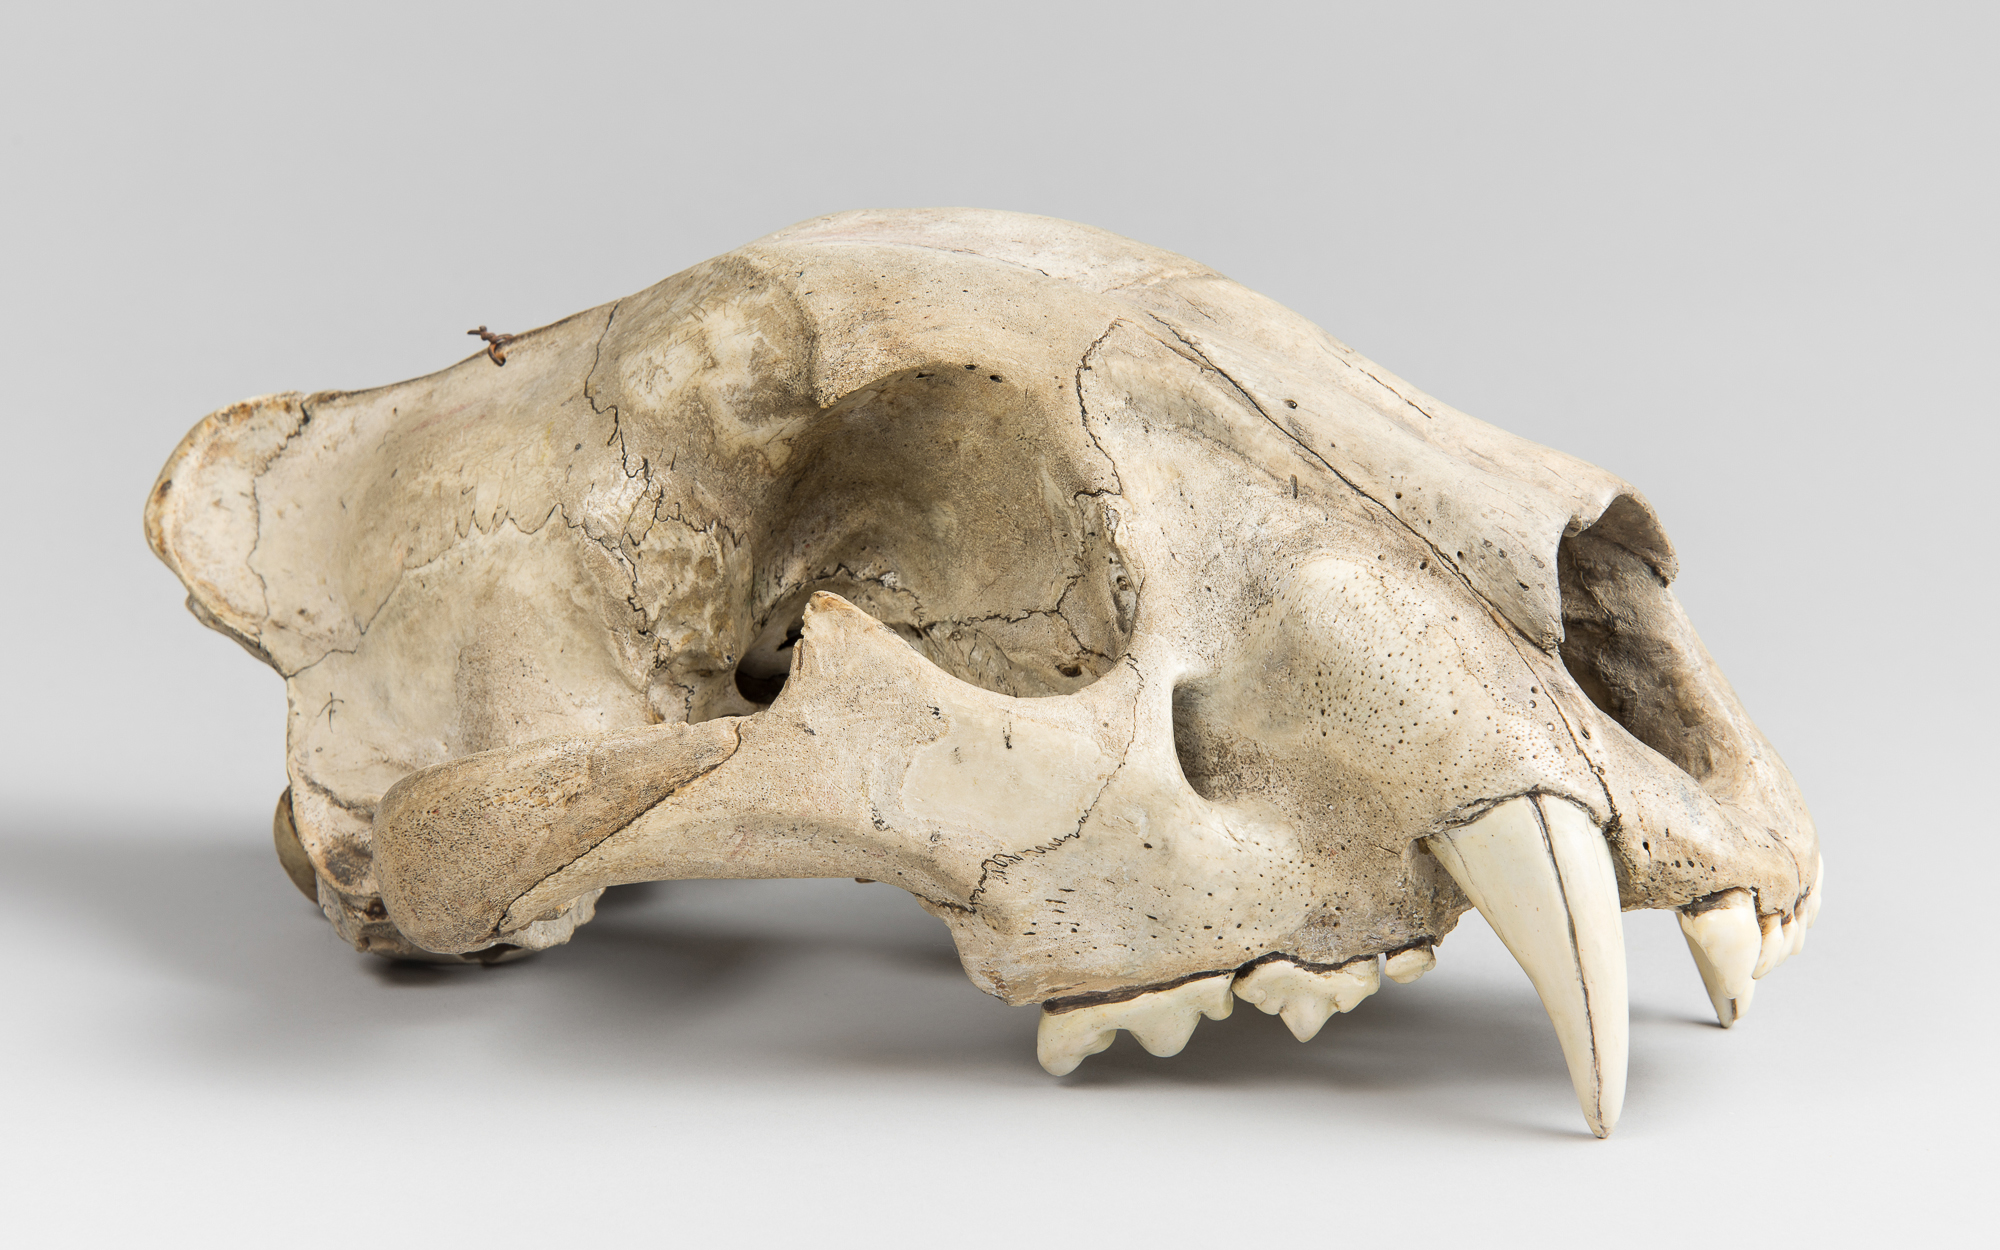 A LATE 19TH/EARLY 20TH CENTURY LION UPPER SKULL (PANTHERA LEO).